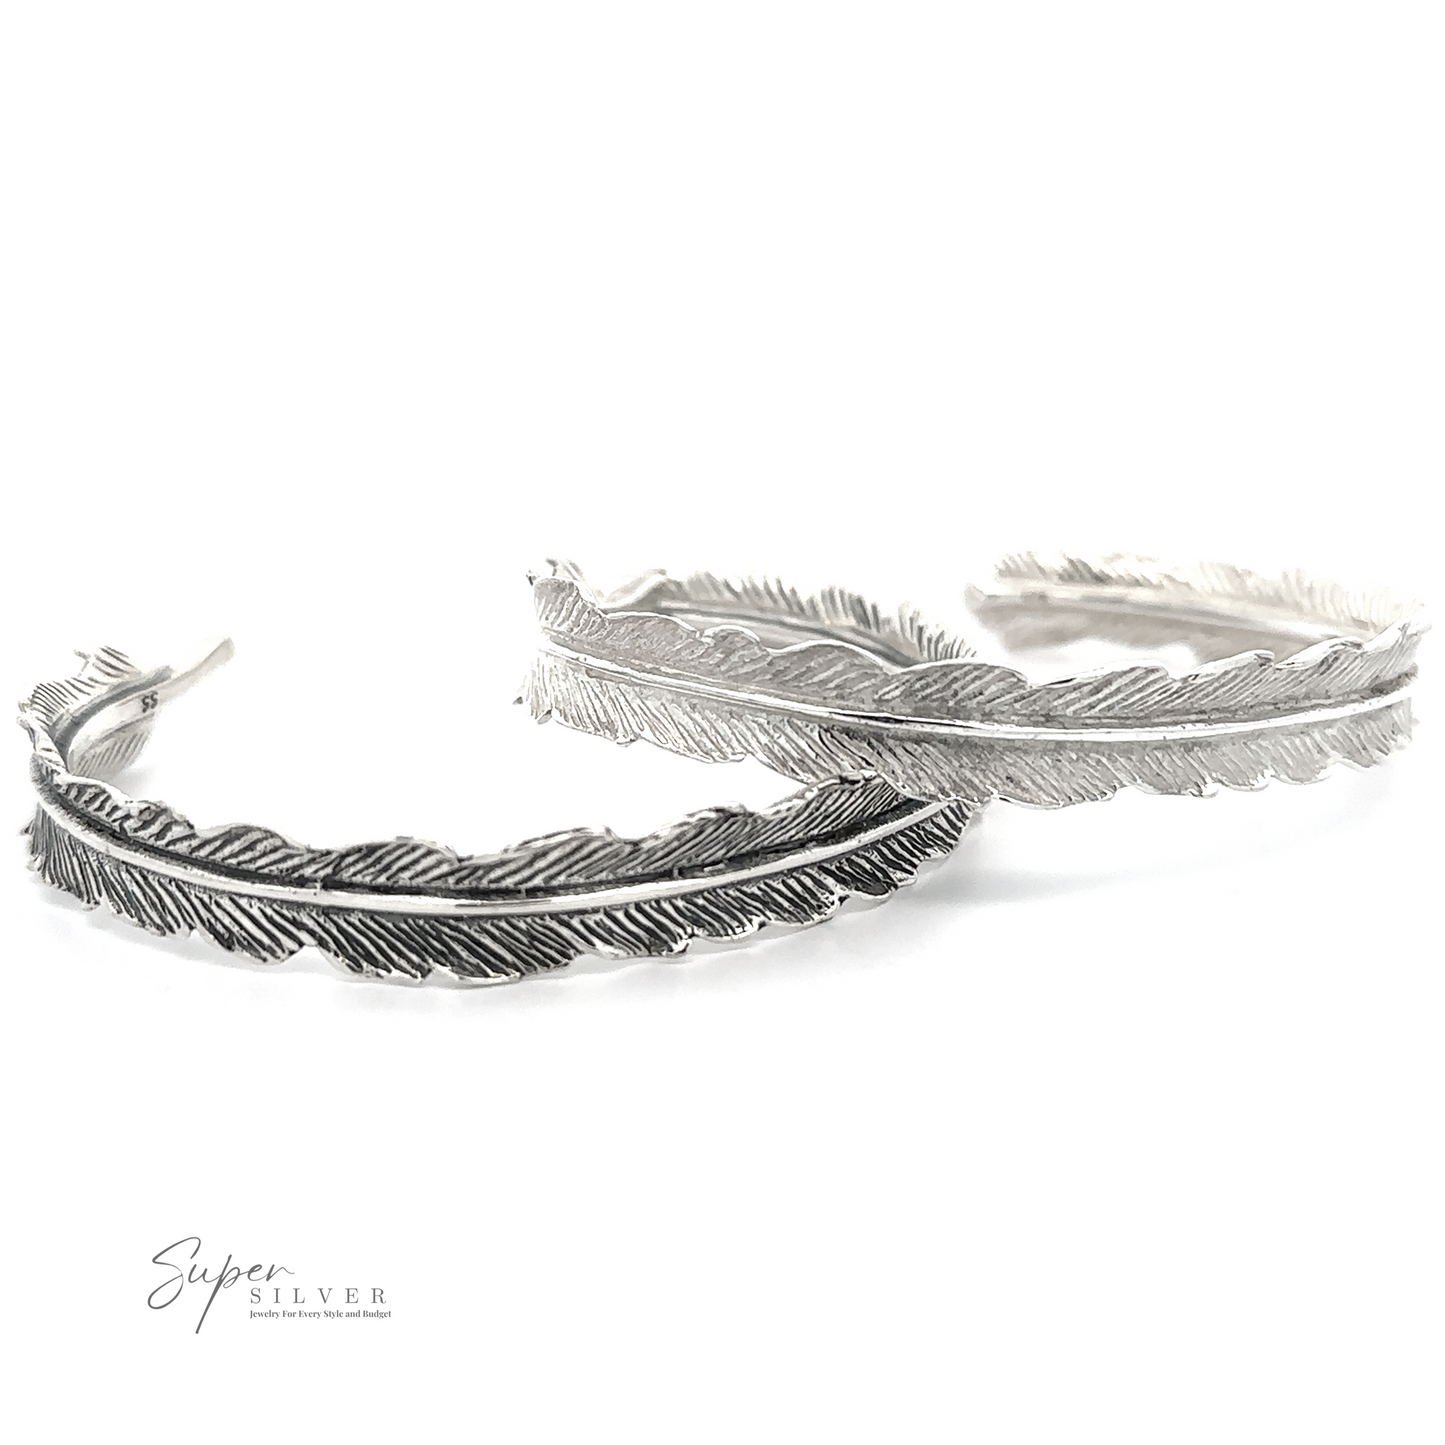 Two Detailed Feather Cuffs, one in dark silver and the other in light silver .925 sterling silver, are displayed side by side on a white background. The brand name "Super Silver" is visible in the bottom left corner, adding a vintage feel to these elegant pieces.